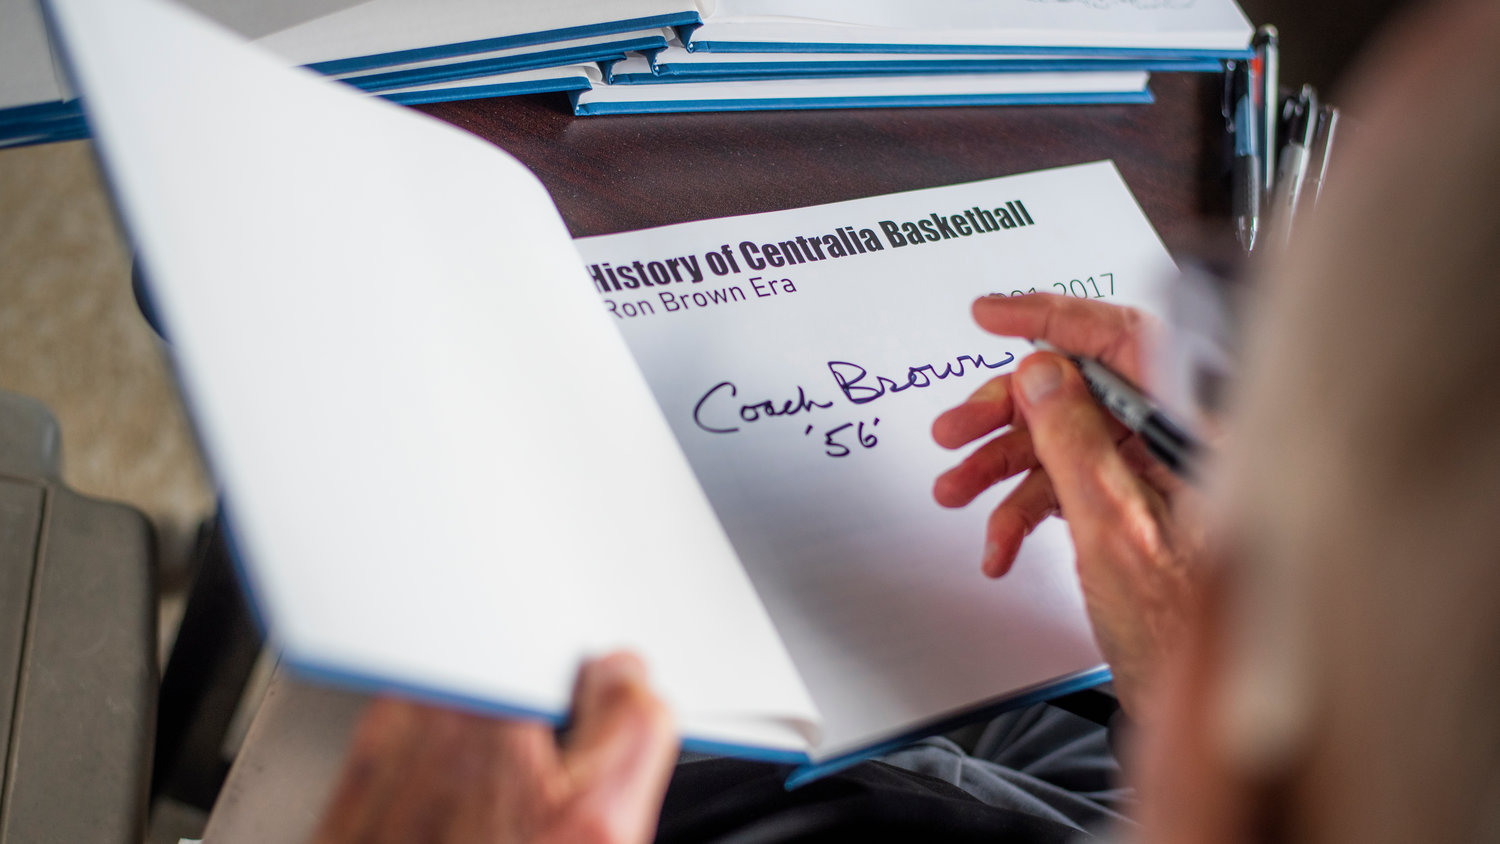 Coach Ron Brown signs a copy of a book titled the History of Centralia Basketball which details the Ron Brown Era. Procedes from book sales will benefit the Centralia Boys Basketball Program. On top of printing costs, $5,000 has already been raised for the program.